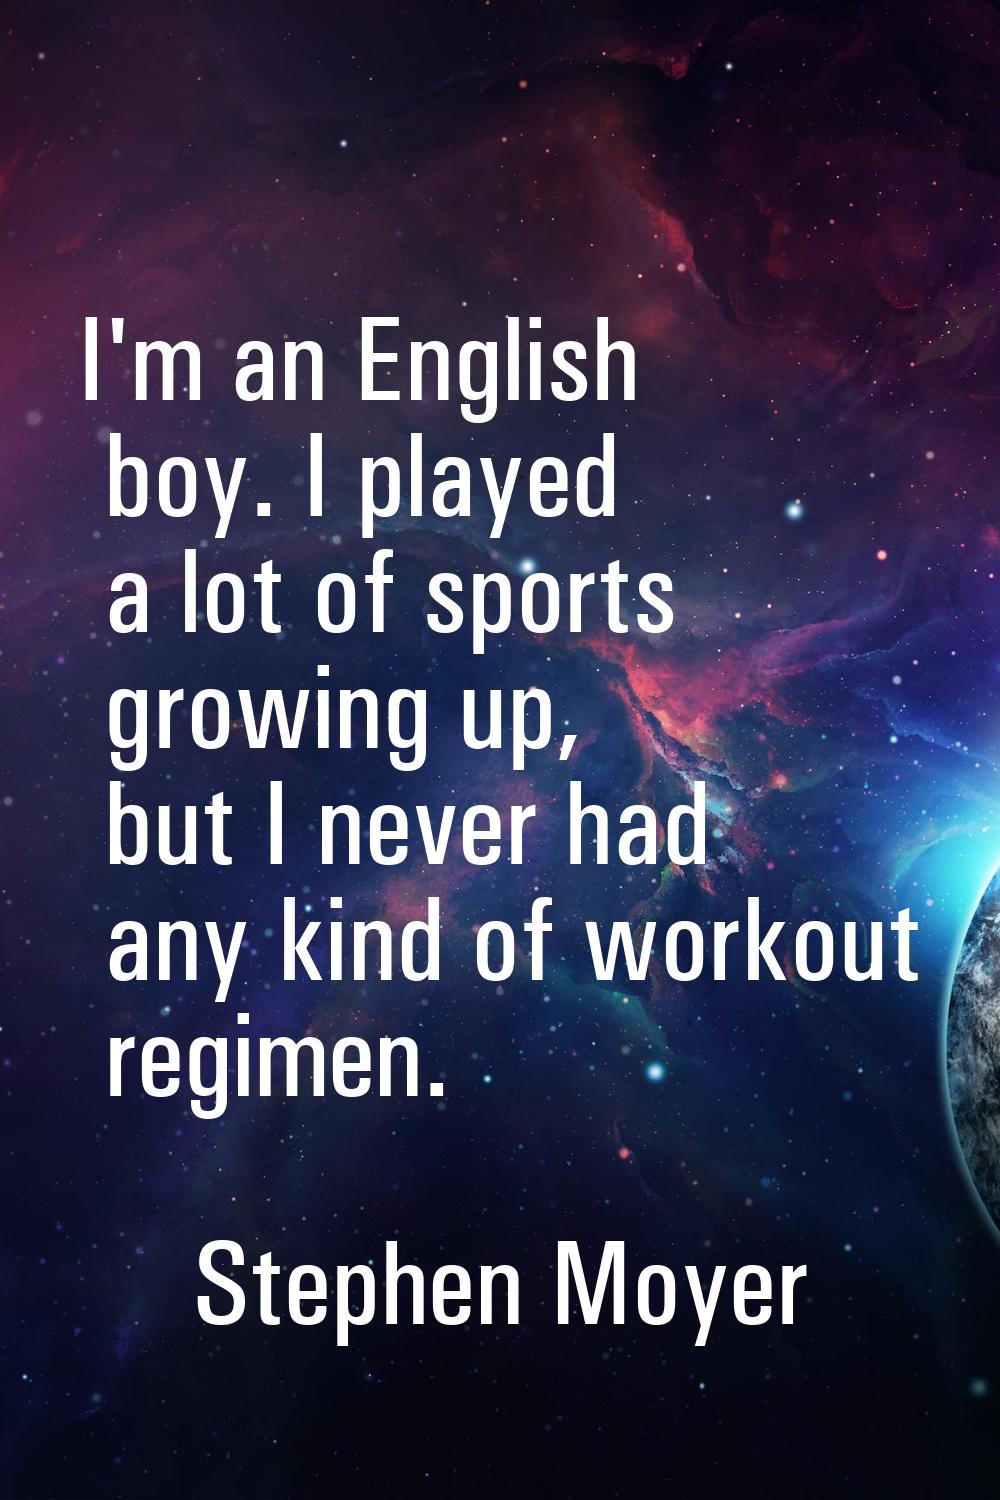 I'm an English boy. I played a lot of sports growing up, but I never had any kind of workout regime